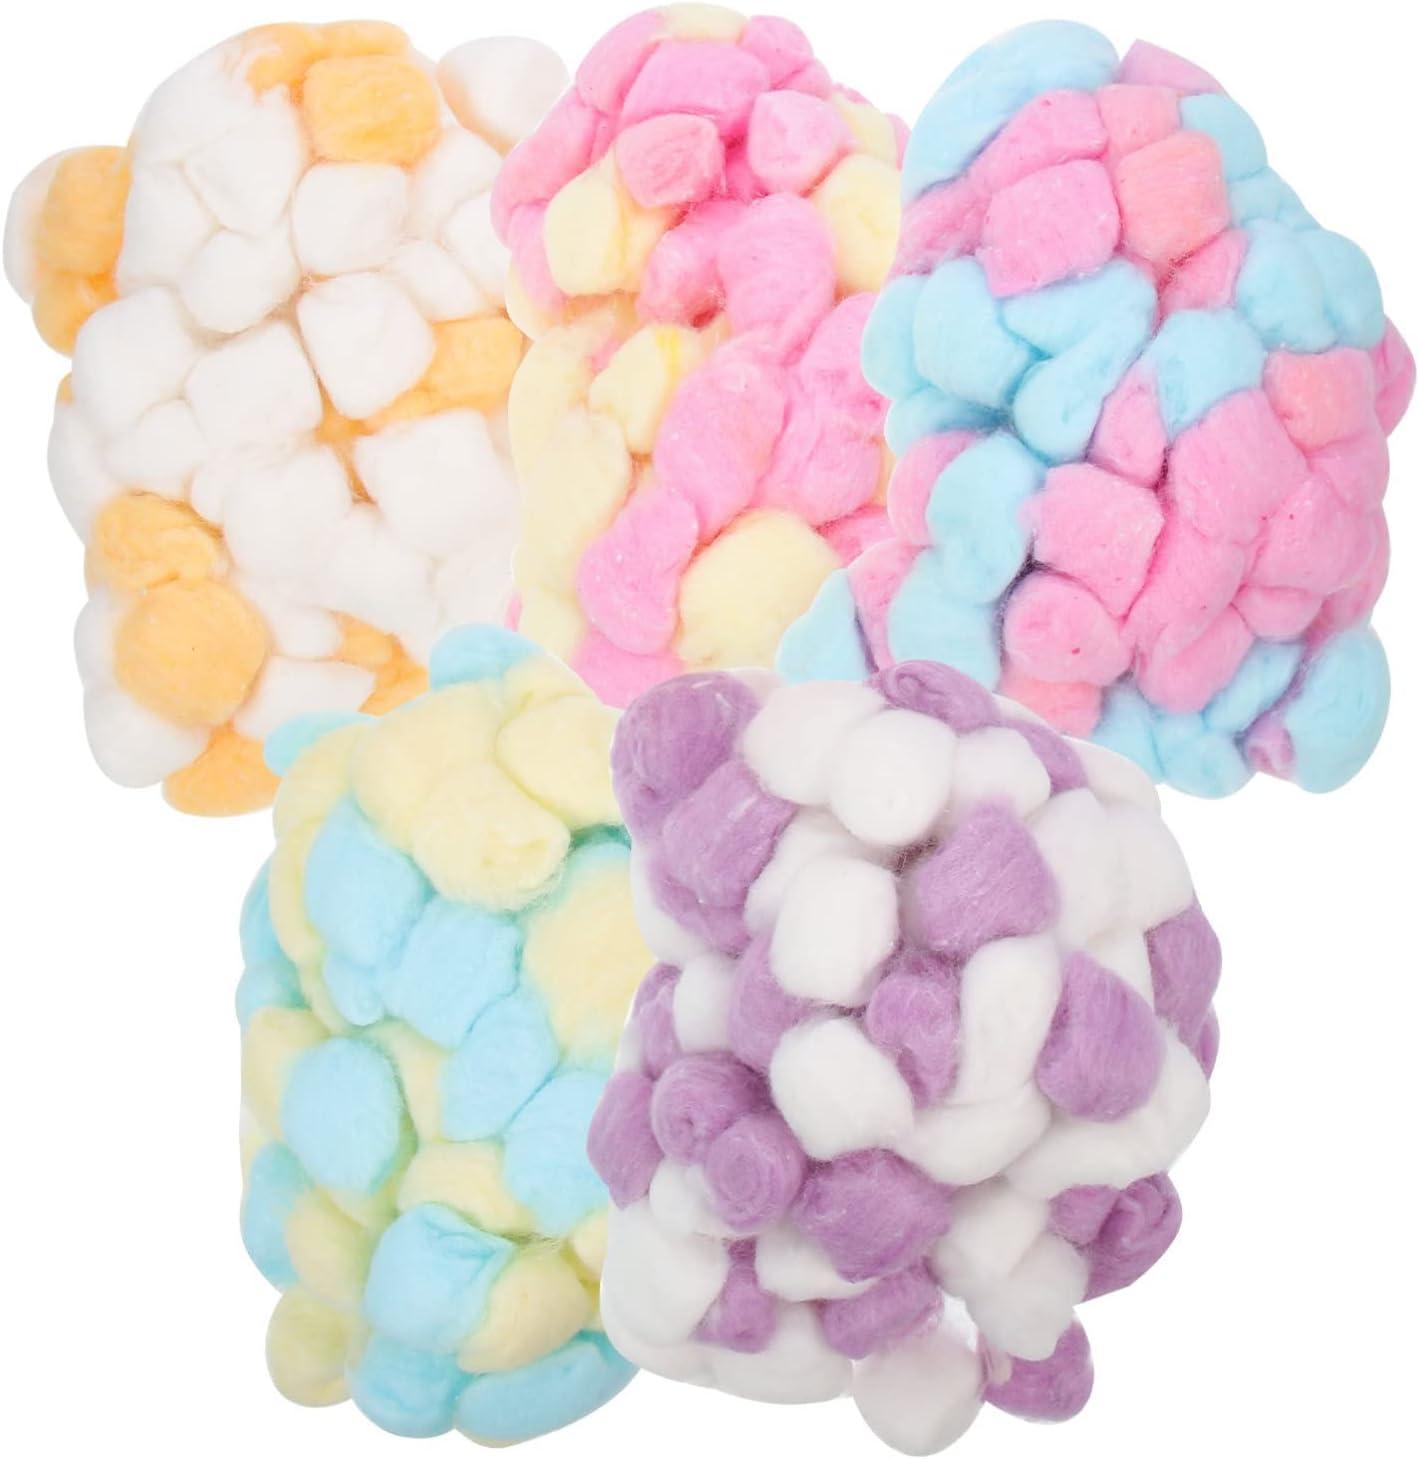 Sewroro 500pcs Colored Cotton Balls Small Pom Poms Degreasing Cotton Ball  for Face Cleansing and Makeup Removal Home Use